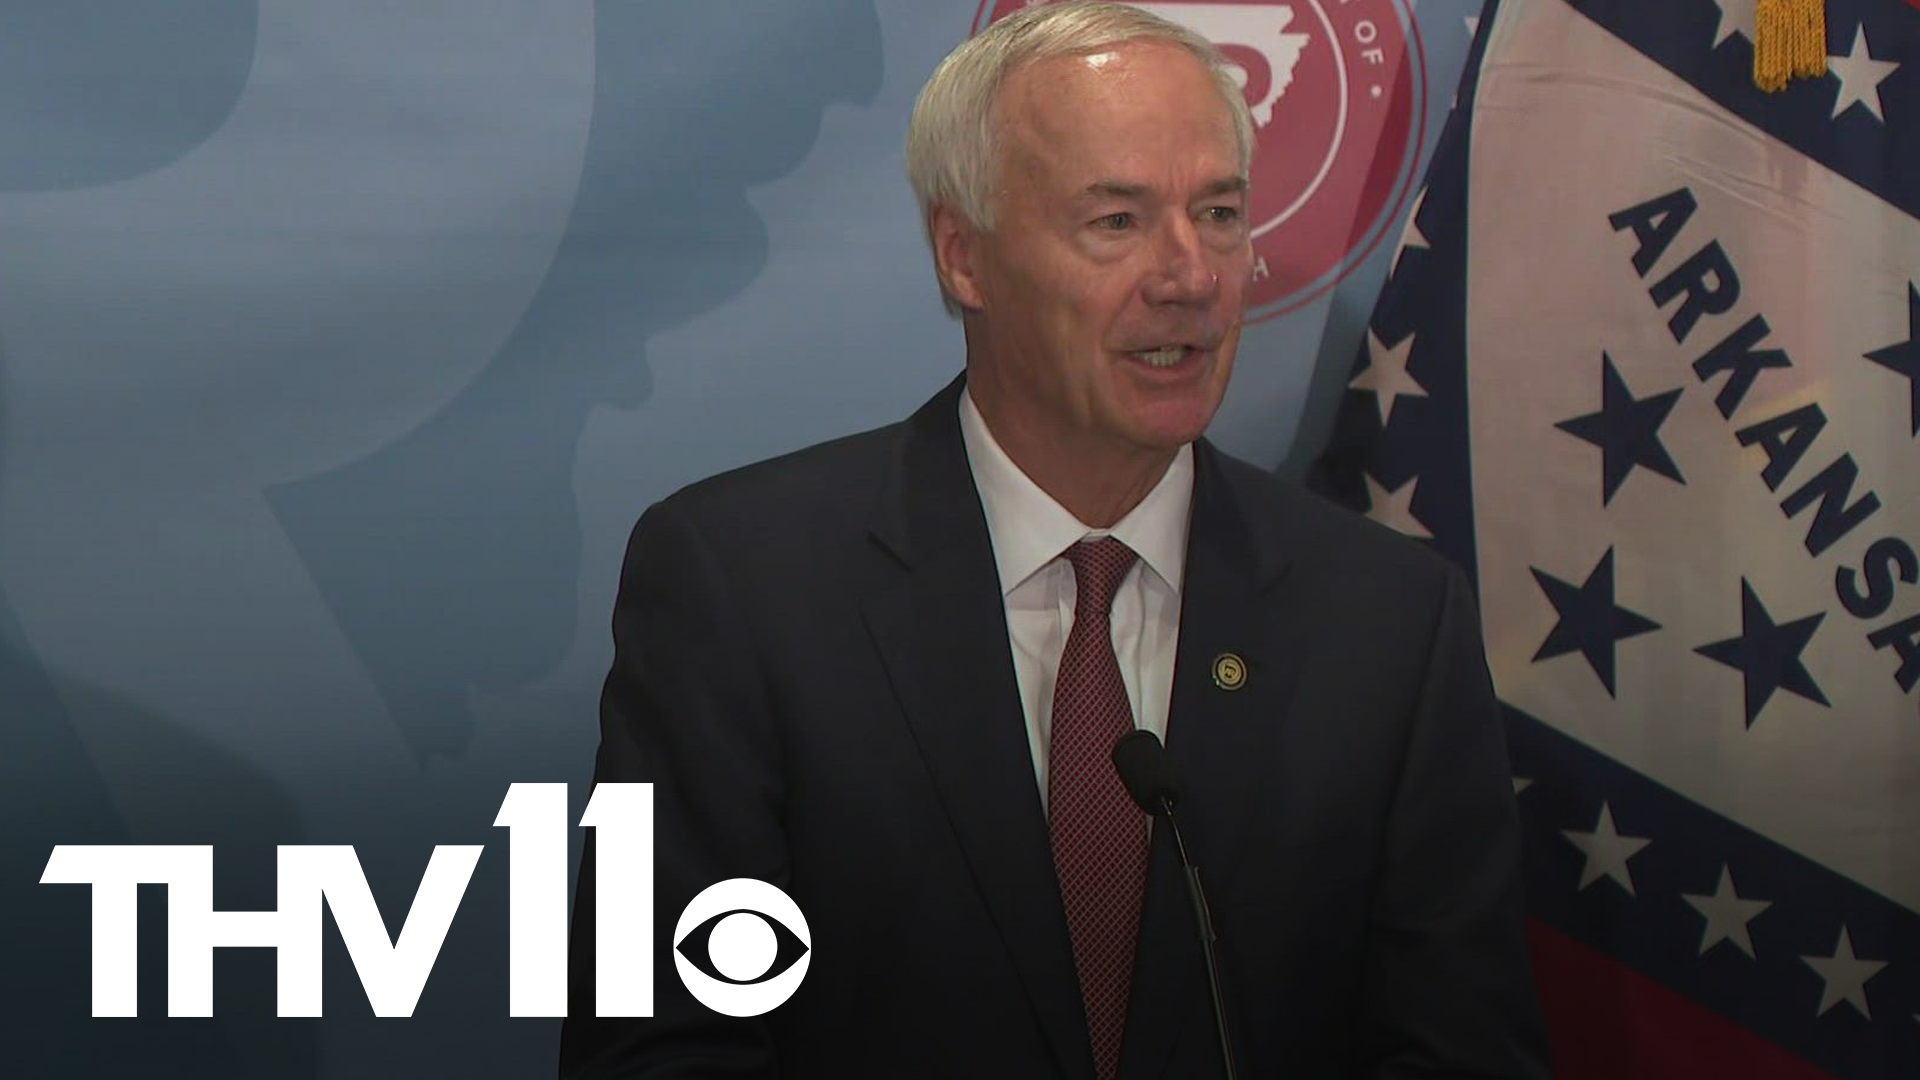 In a press conference on Thursday, Arkansas Governor Asa Hutchinson said the state would welcome refugees from Afghanistan fleeing the Taliban.